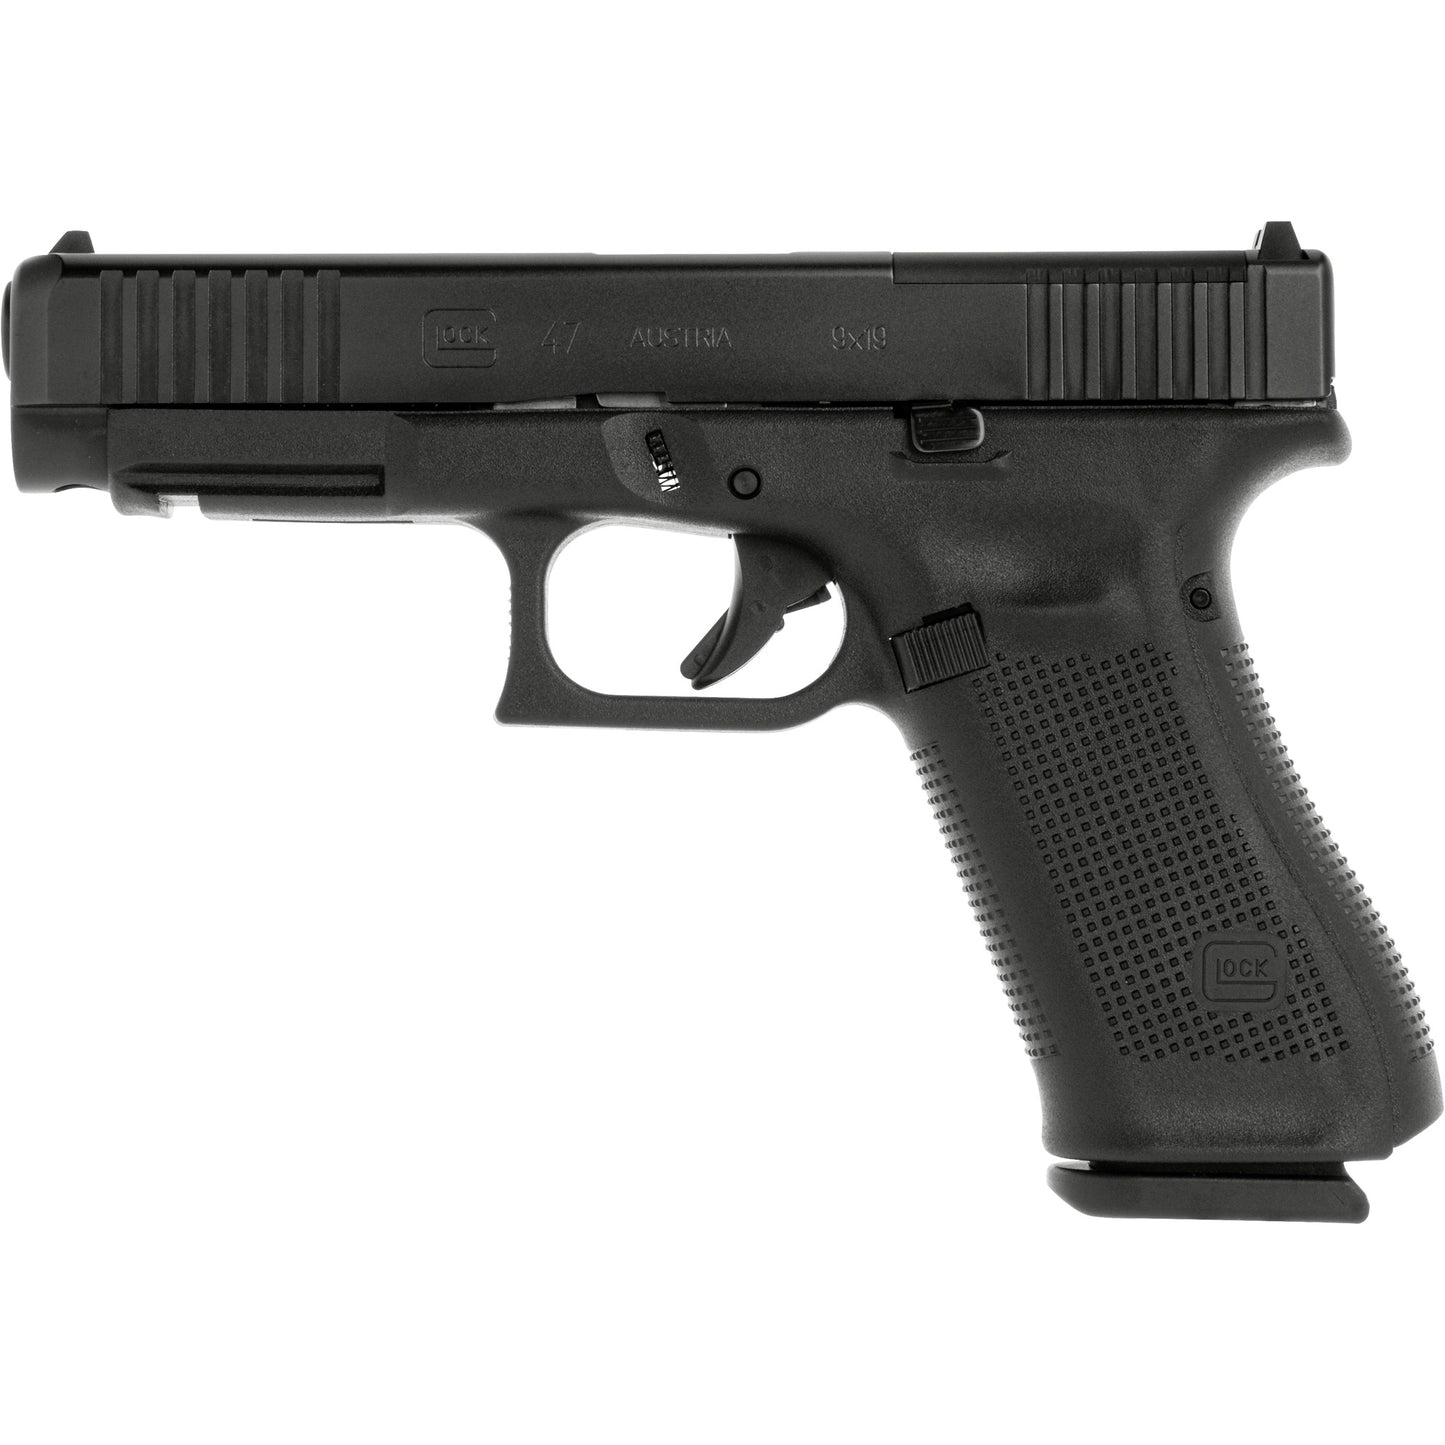 Glock, 47 M.O.S., Semi-automatic Full Size Polymer Frame Pistol, Safe Action, 9MM, 4.49" Barrel, Black, Matte Finish, Fixed Sights, Optics Ready, 17 Rounds, 3 Magazines, Comes With Glock OEM Adapter Plate 02 for Trijicon RMR Footprint